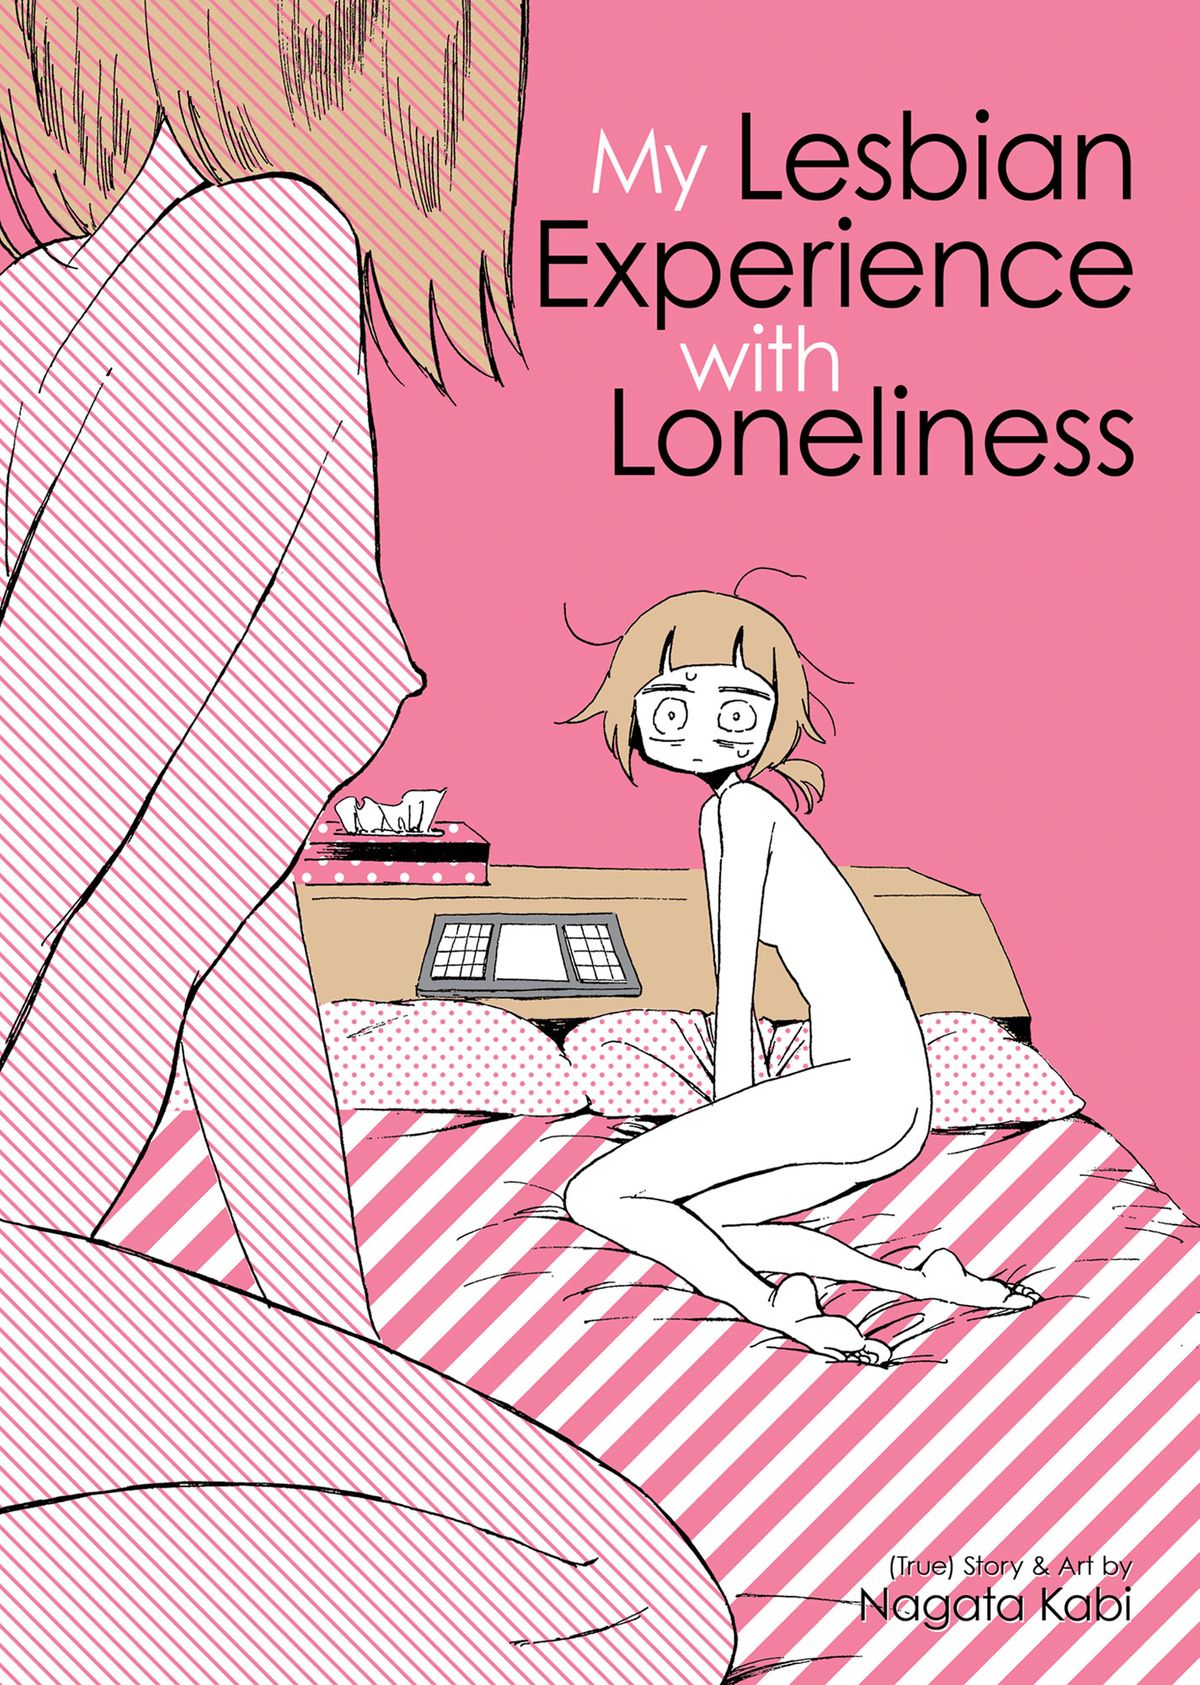 Need a hug? Read My Lesbian Experience with Loneliness